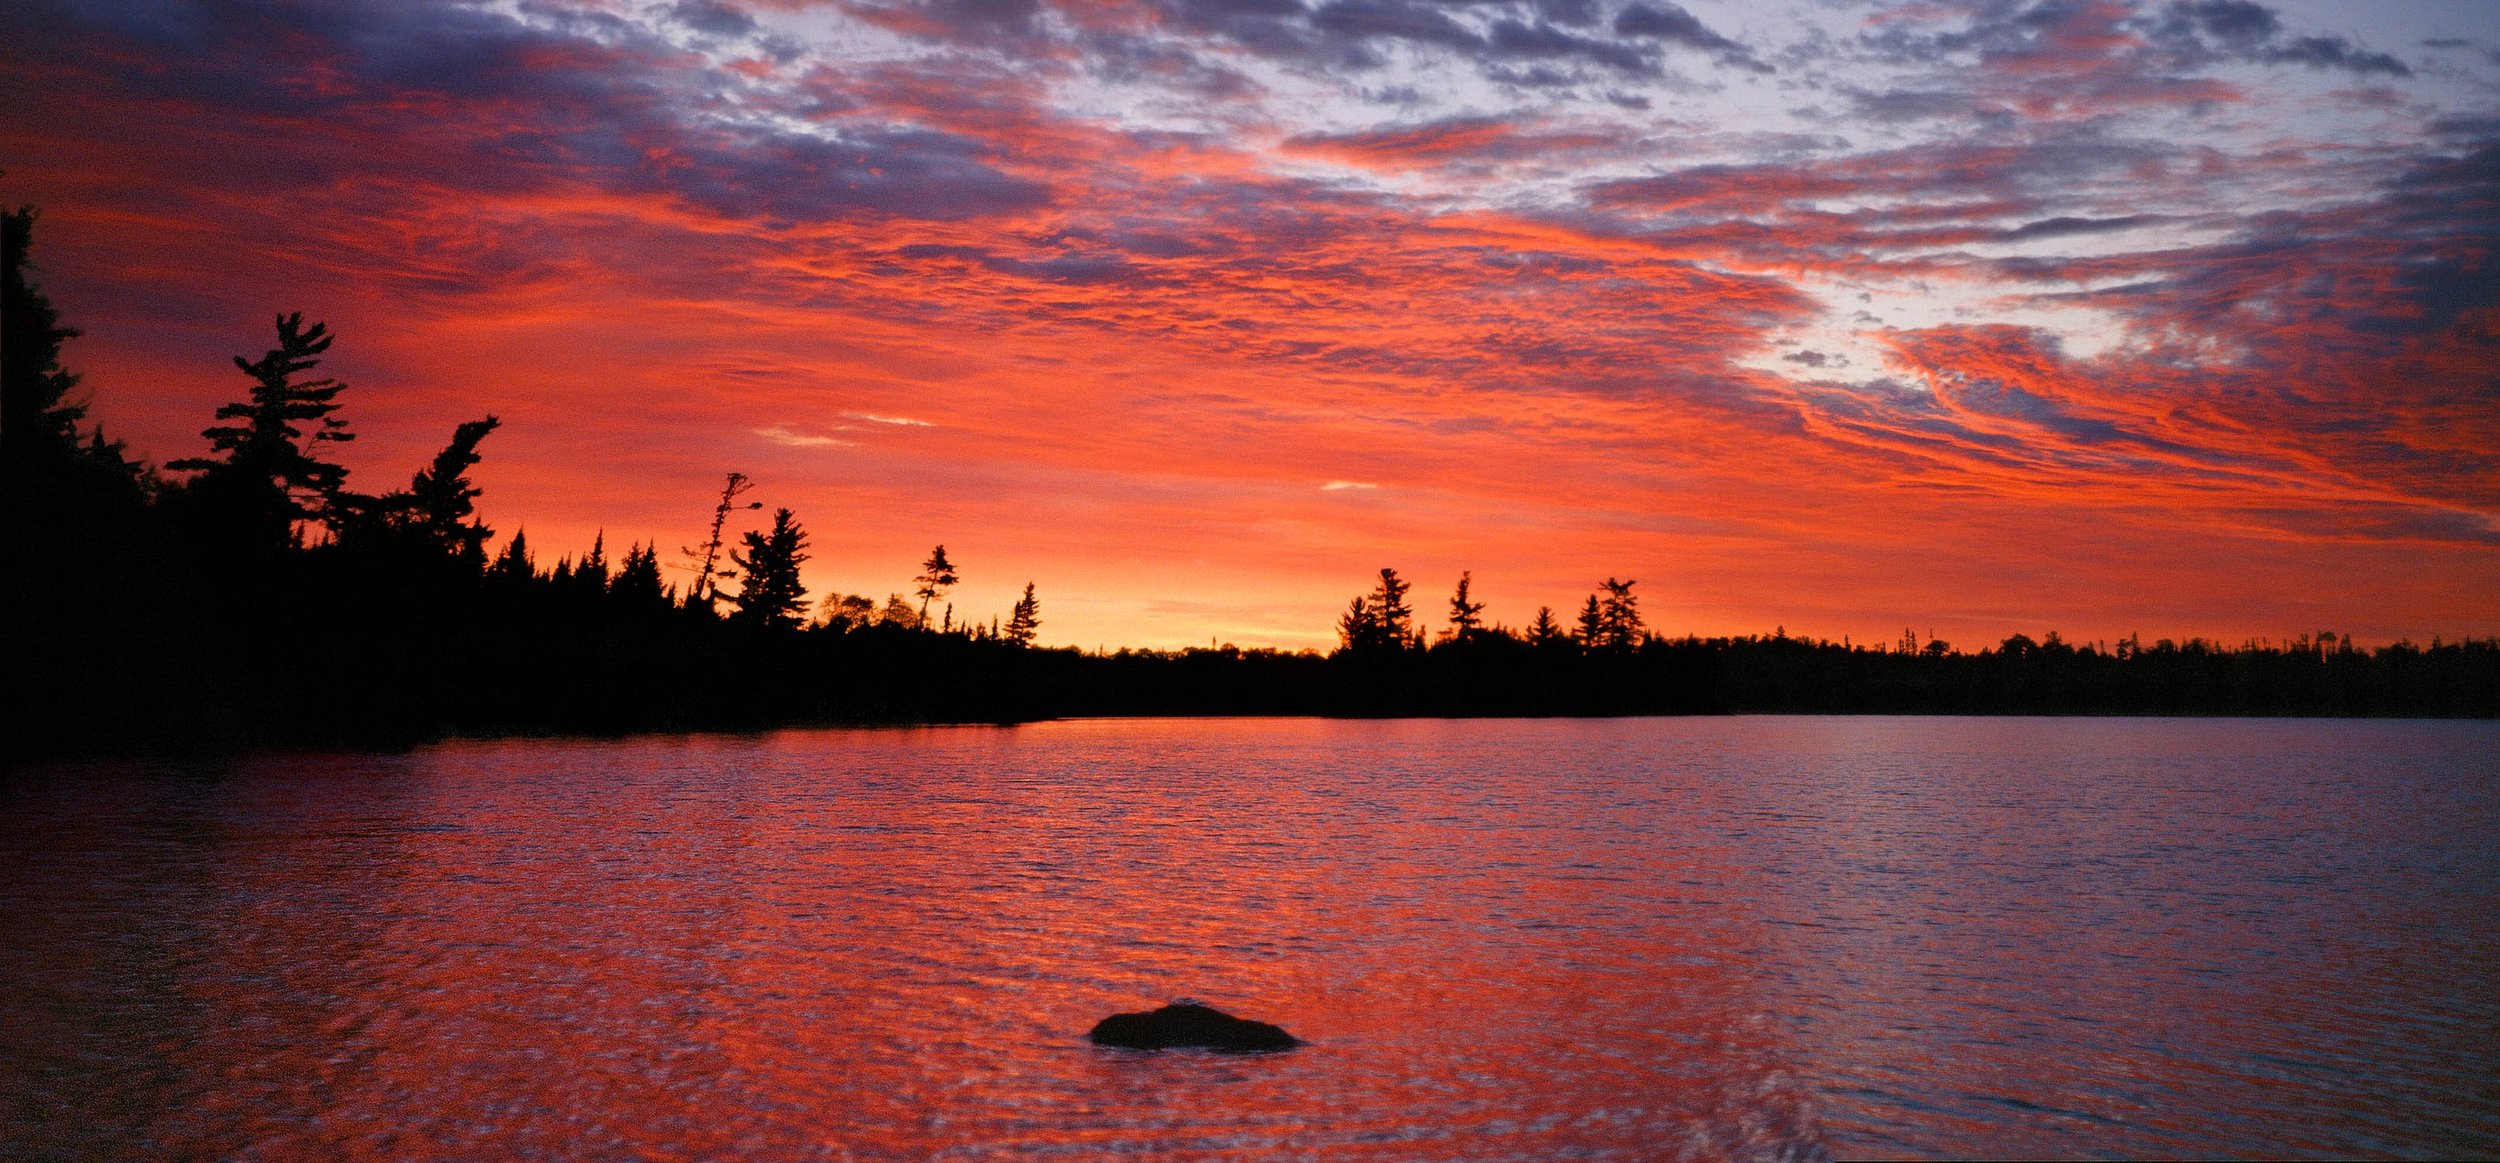 Sunrise Over the Boundary Waters